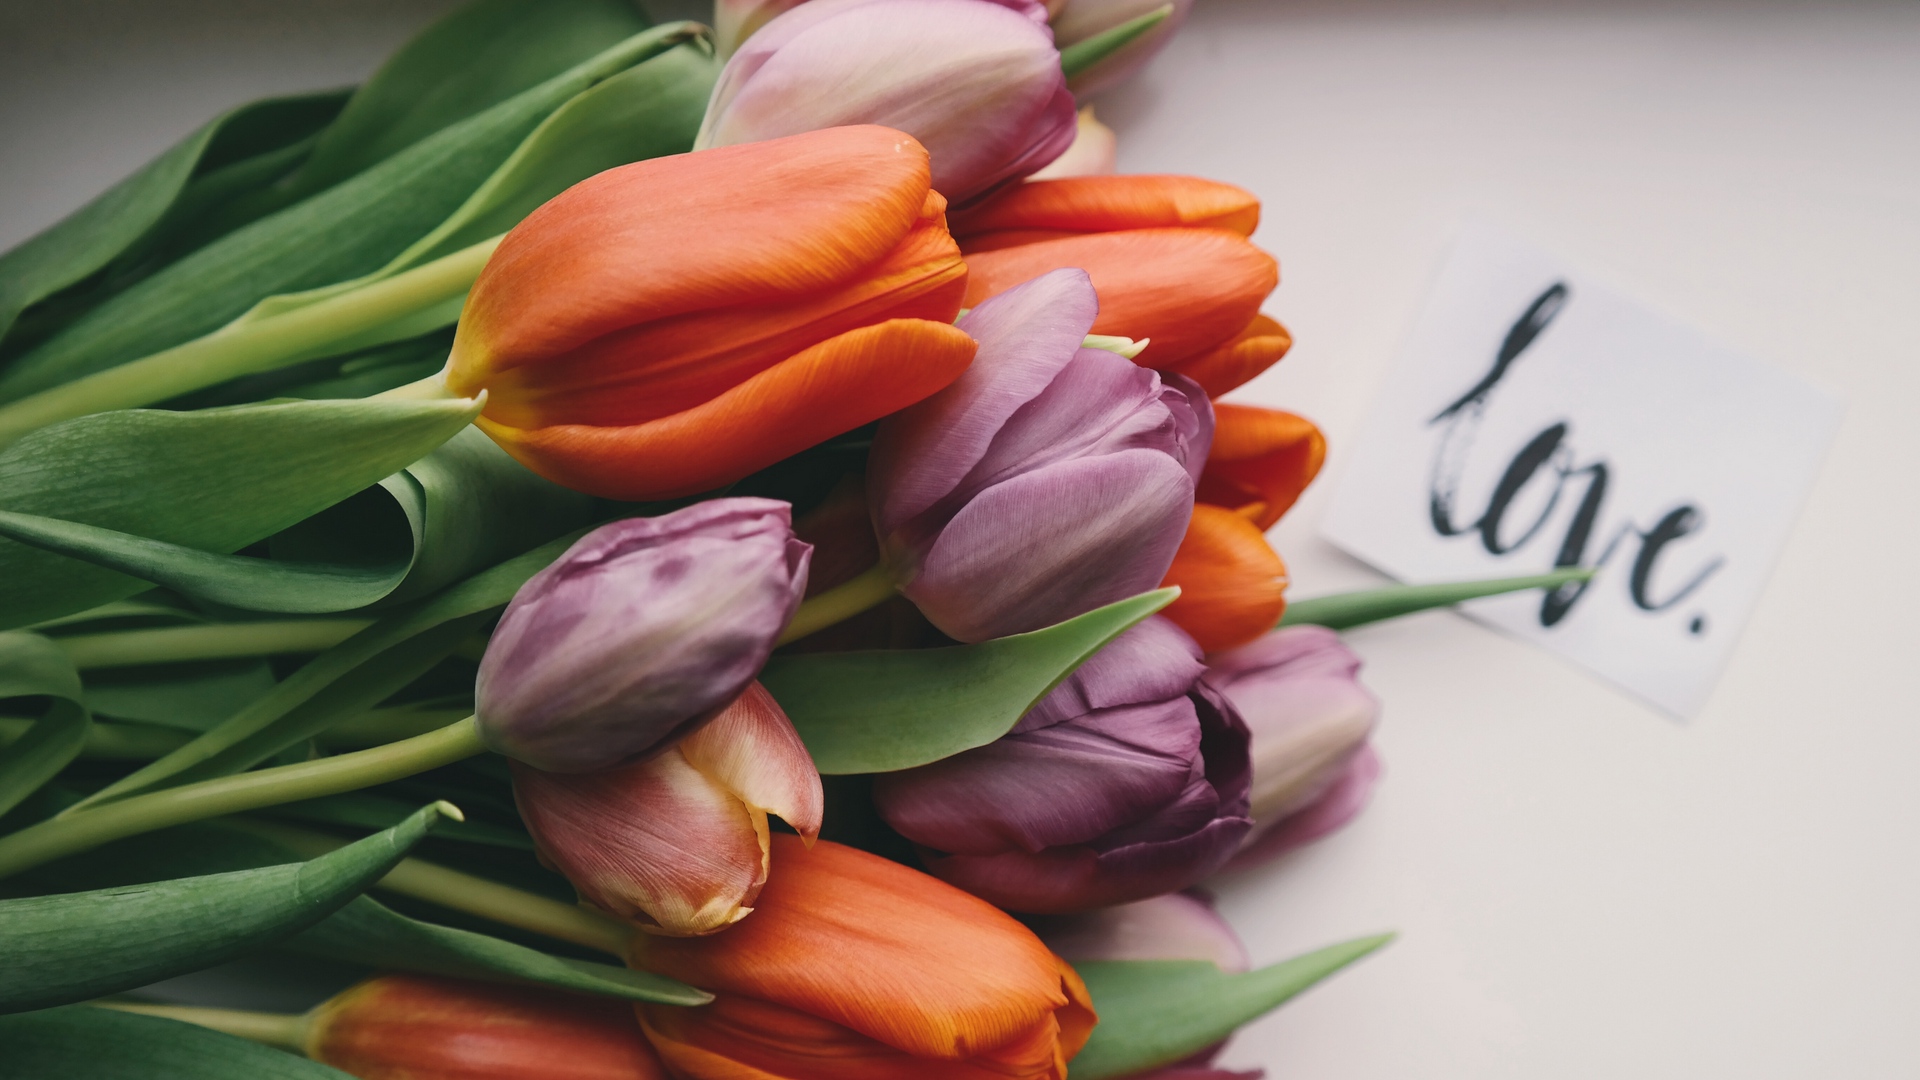 Tulips Bouquet With Love Message - Tulips Bouquet Hd - 1920x1080 Wallpaper  